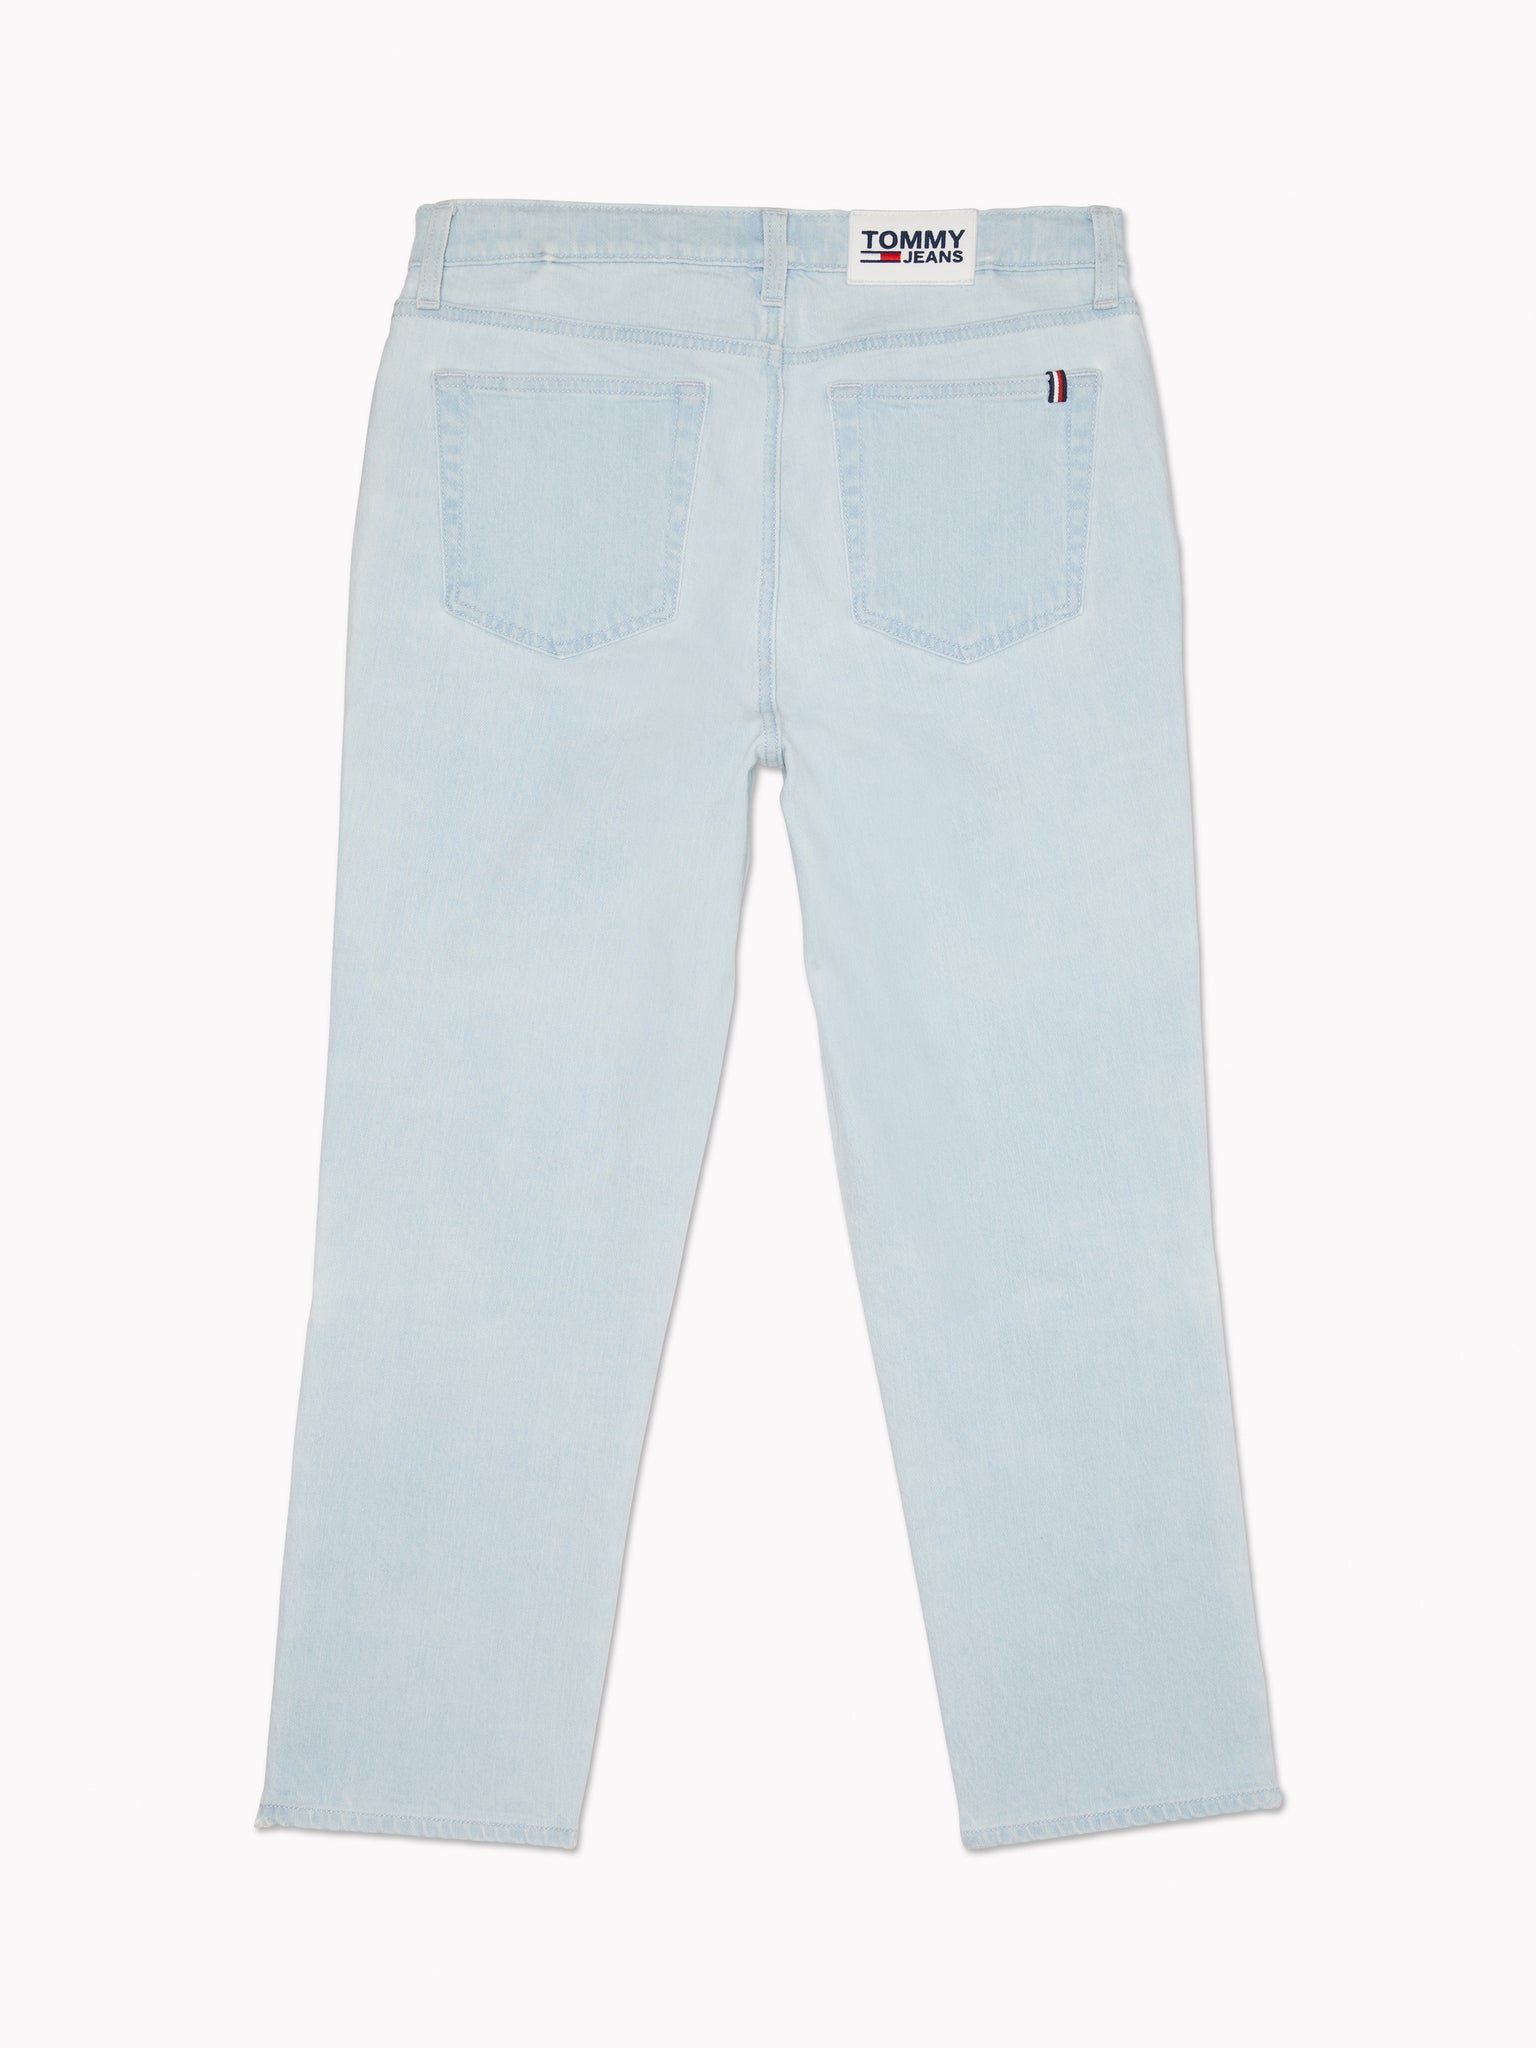 Cropped Slim Fit Jean (Womens) - Light Wash